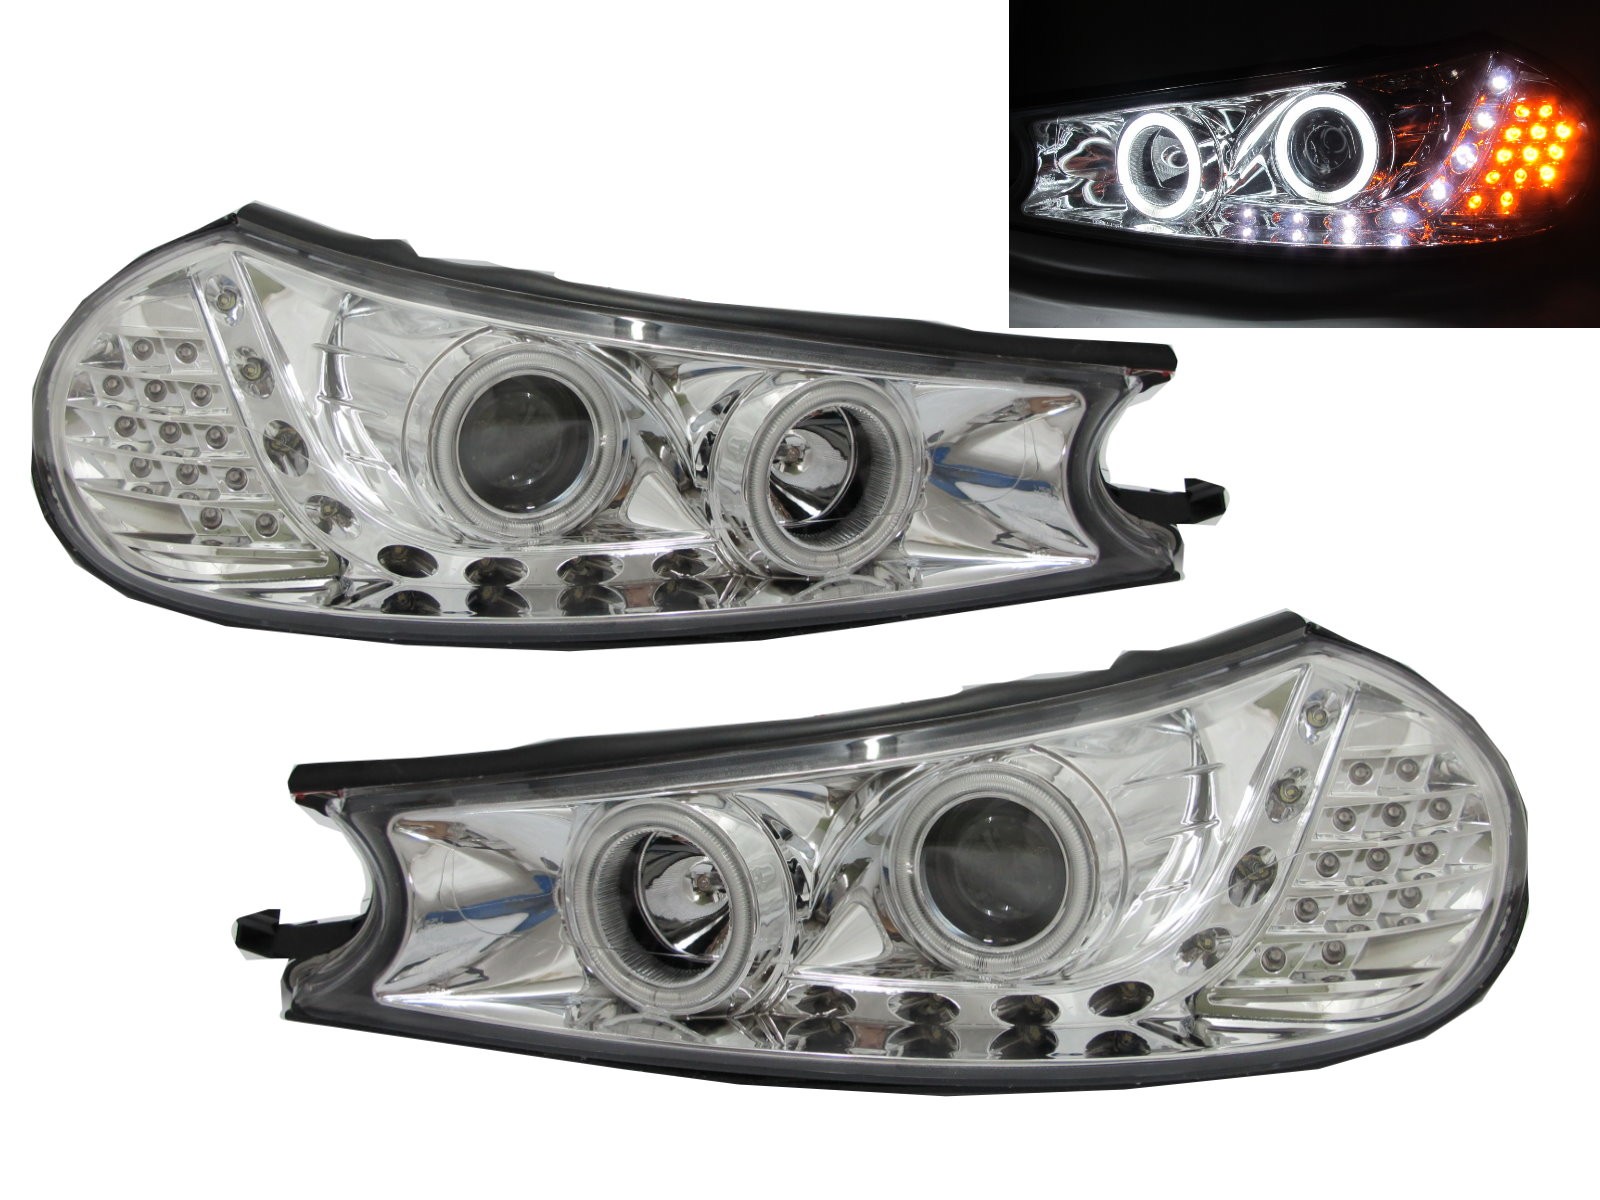 CrazyTheGod MONDEO HC/HE Second generation 1996-2001 Wagon 4D/5D CCFL Projector R8Look Headlight Headlamp Chrome for FORD LHD